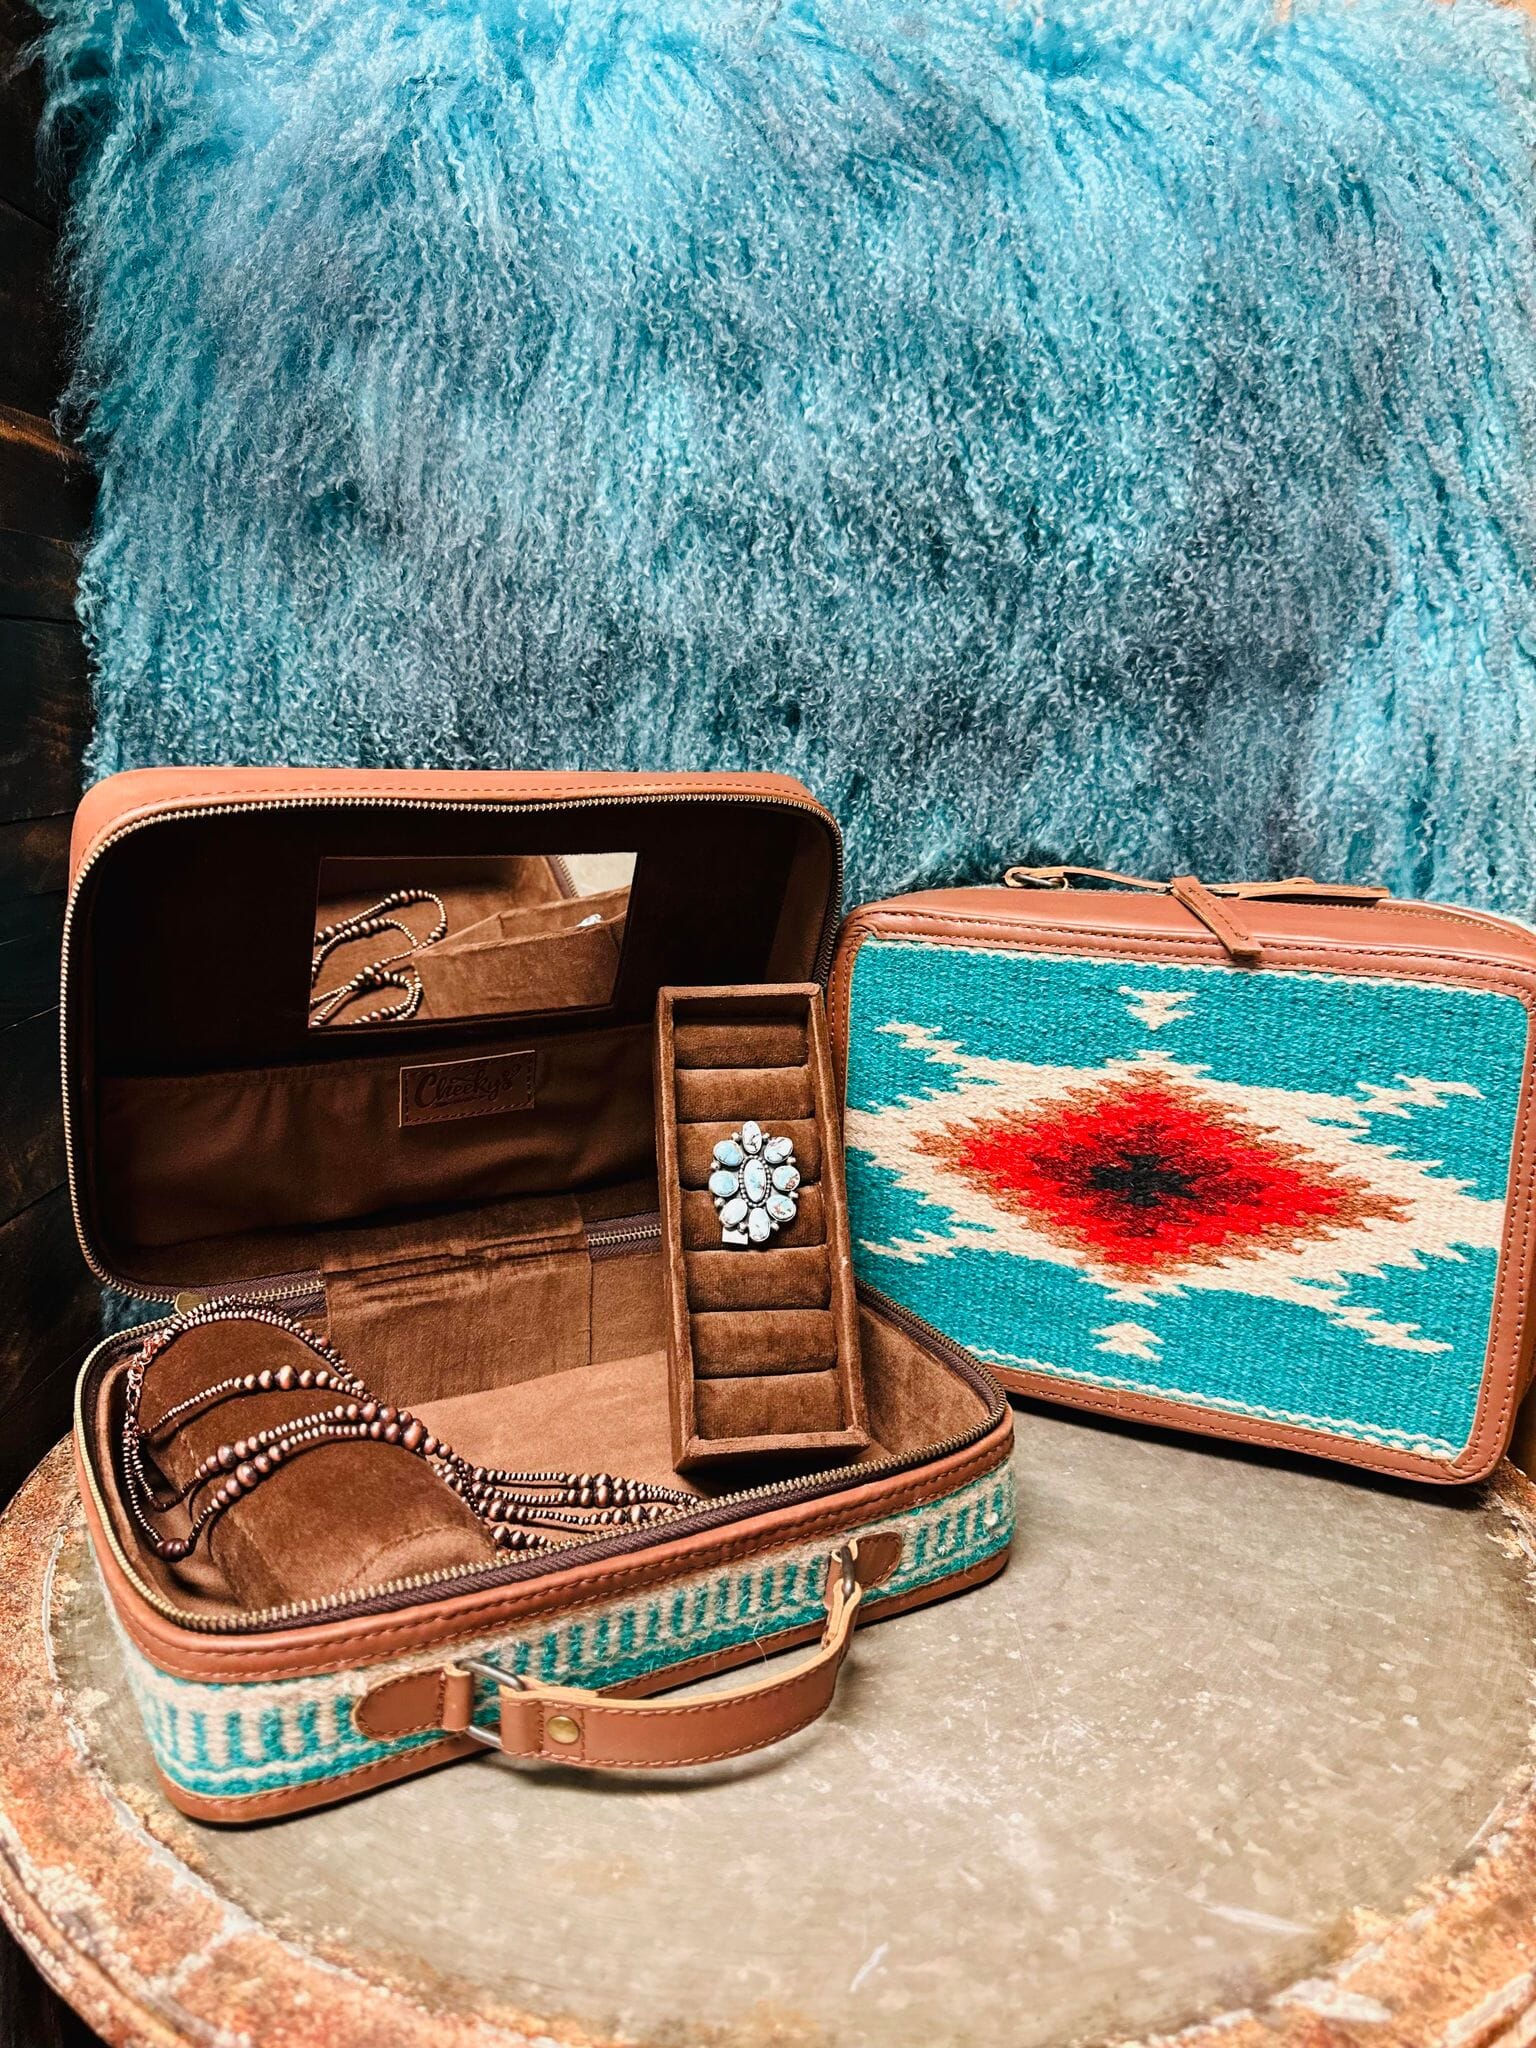 Grissom Saddle Blanket Square Jewelry Case Cheekys Brand 